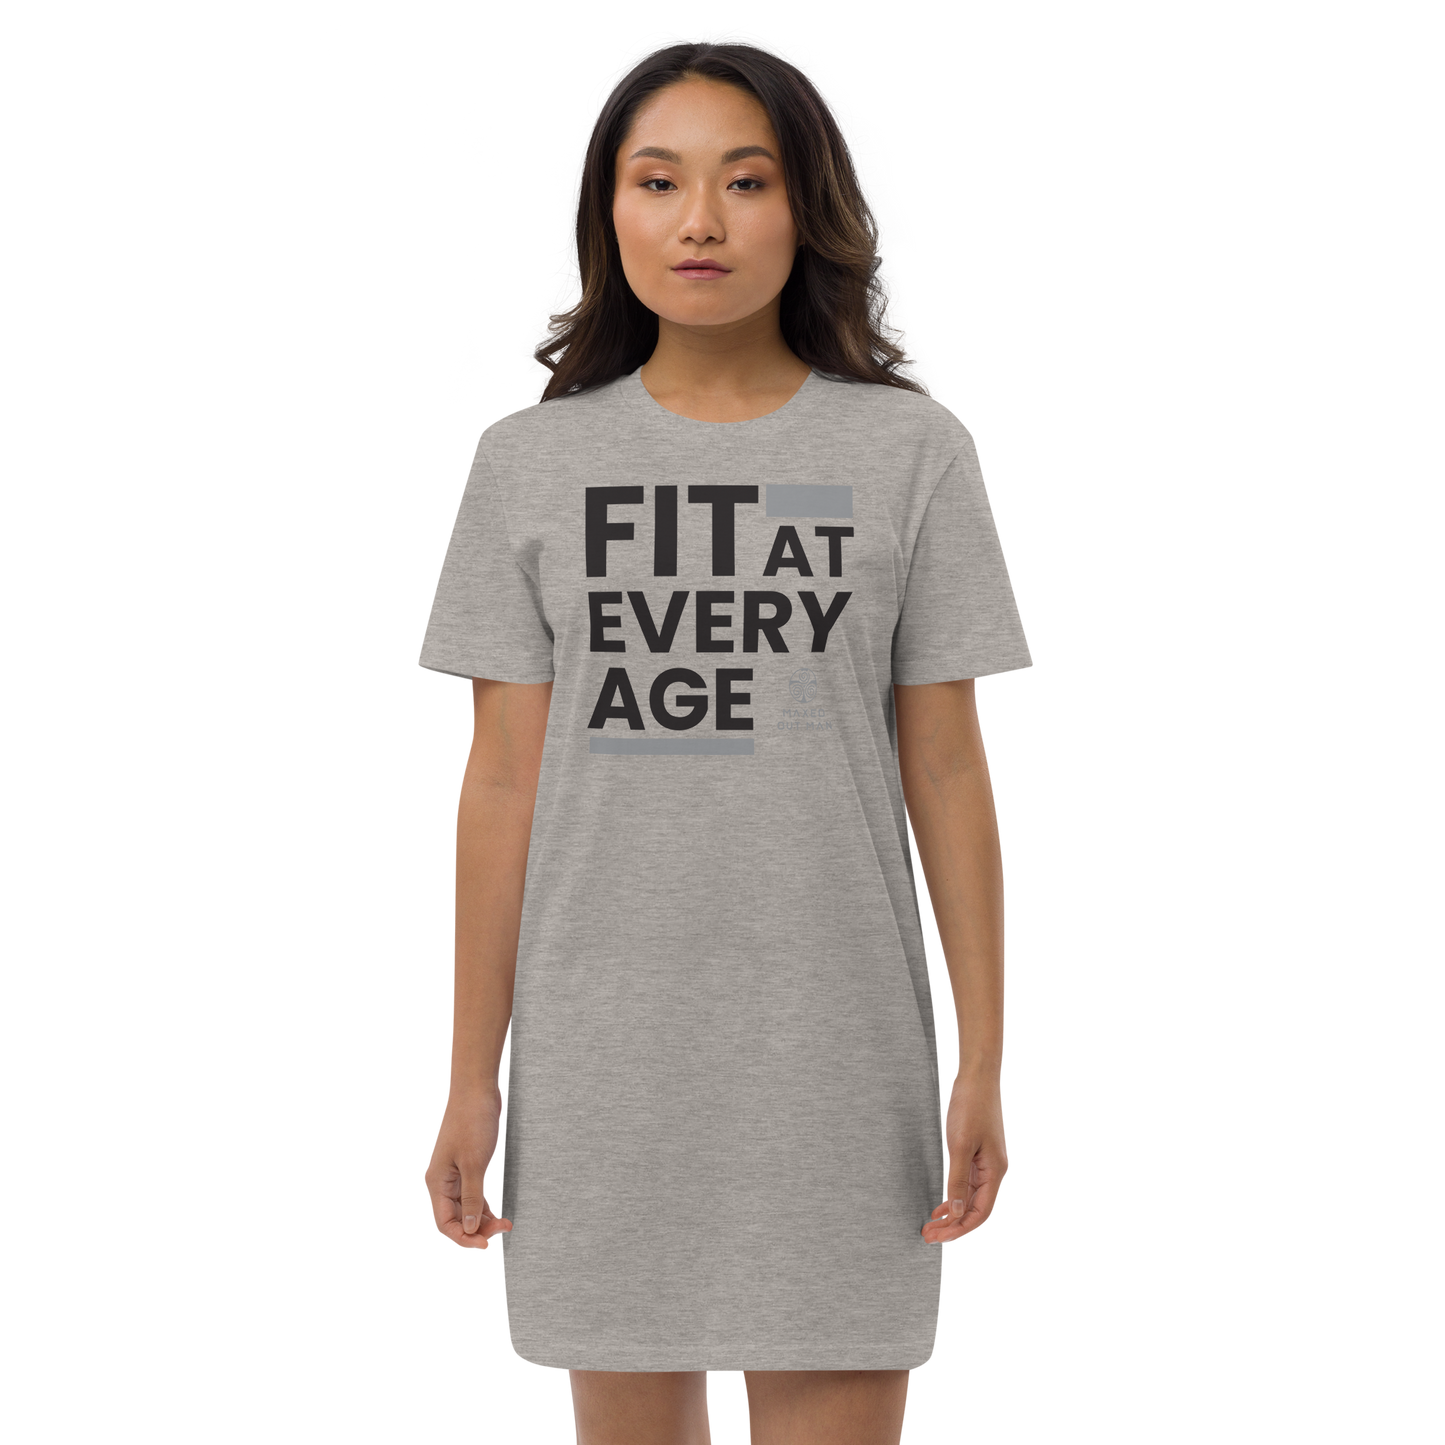 Fit at Every Age Organic Cotton T-shirt Dress - Lighter Colors